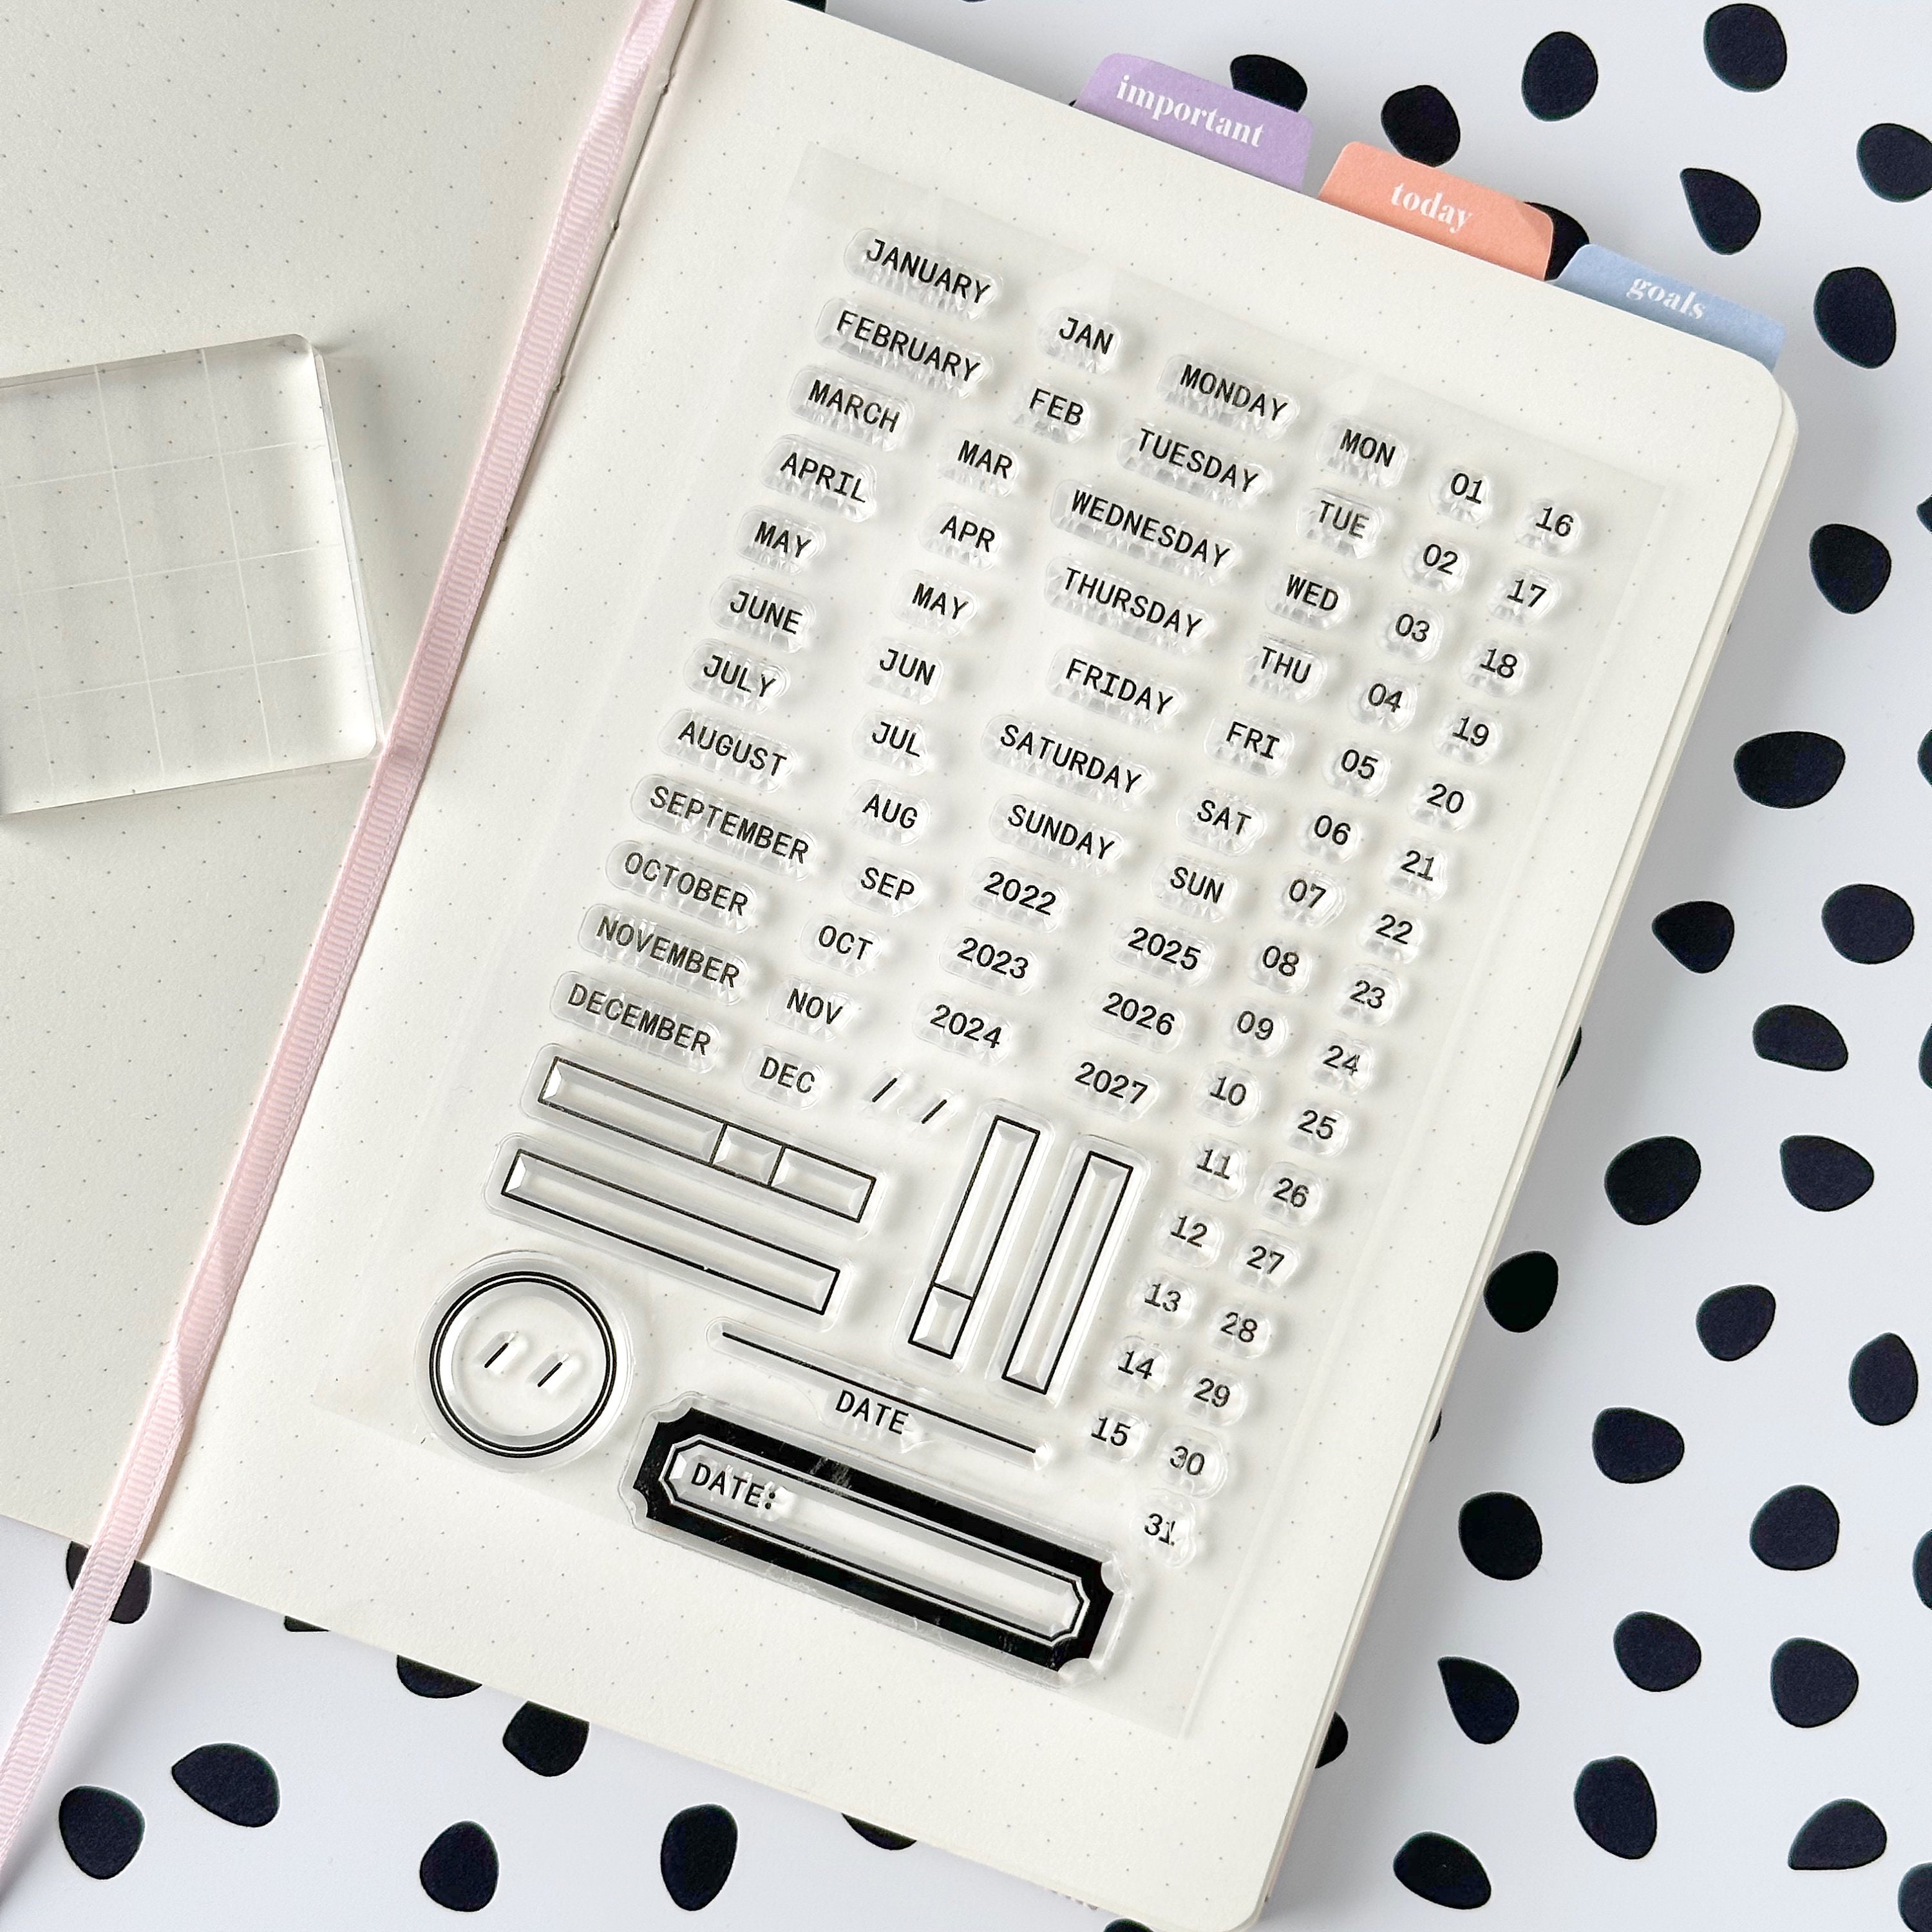 360 Number Stickers for Digital Planners, Round Digital Bullet Point  Journal Stickers for Lists Pages Dates, Functional Digital Stickers 